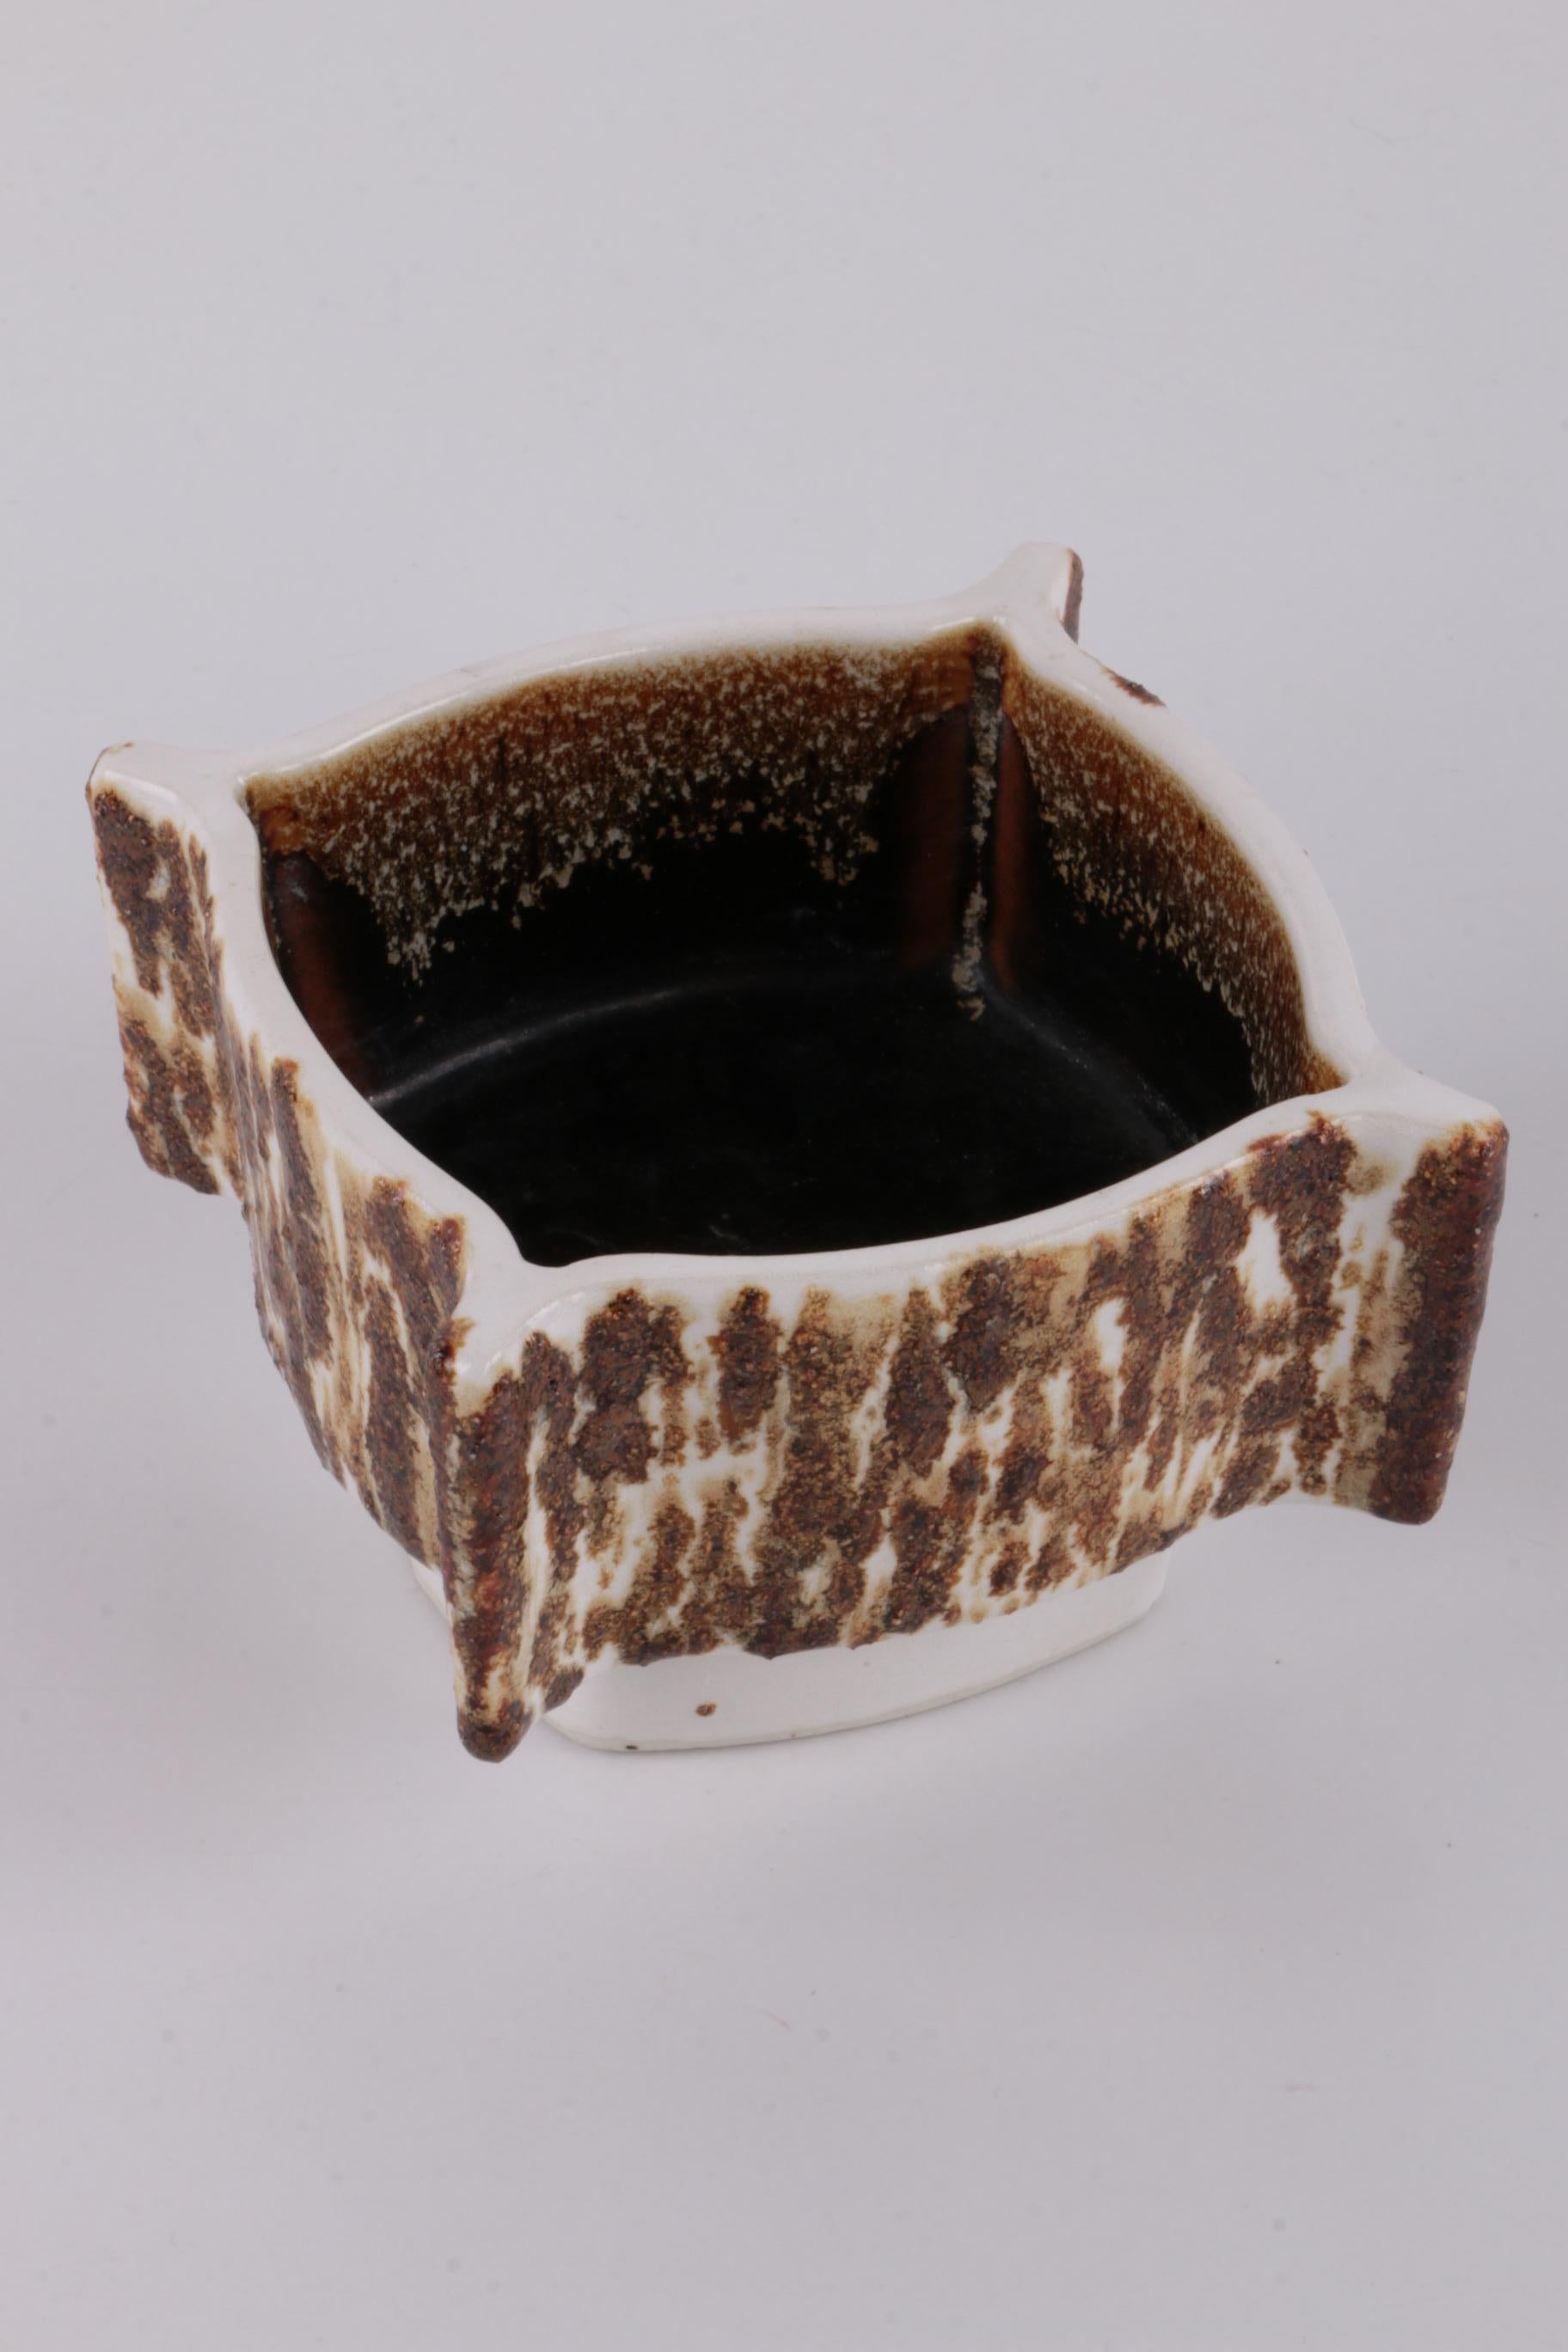 Vintage Yamasan Ikebana bowl beautiful ceramics from Japan 1960s


Vintage Ikebana bowl from Yamasan.

The glaze has a rich brown color and resembles highly grained tree bark.

Ikebana is the art of Japanese flower arranging and this bowl